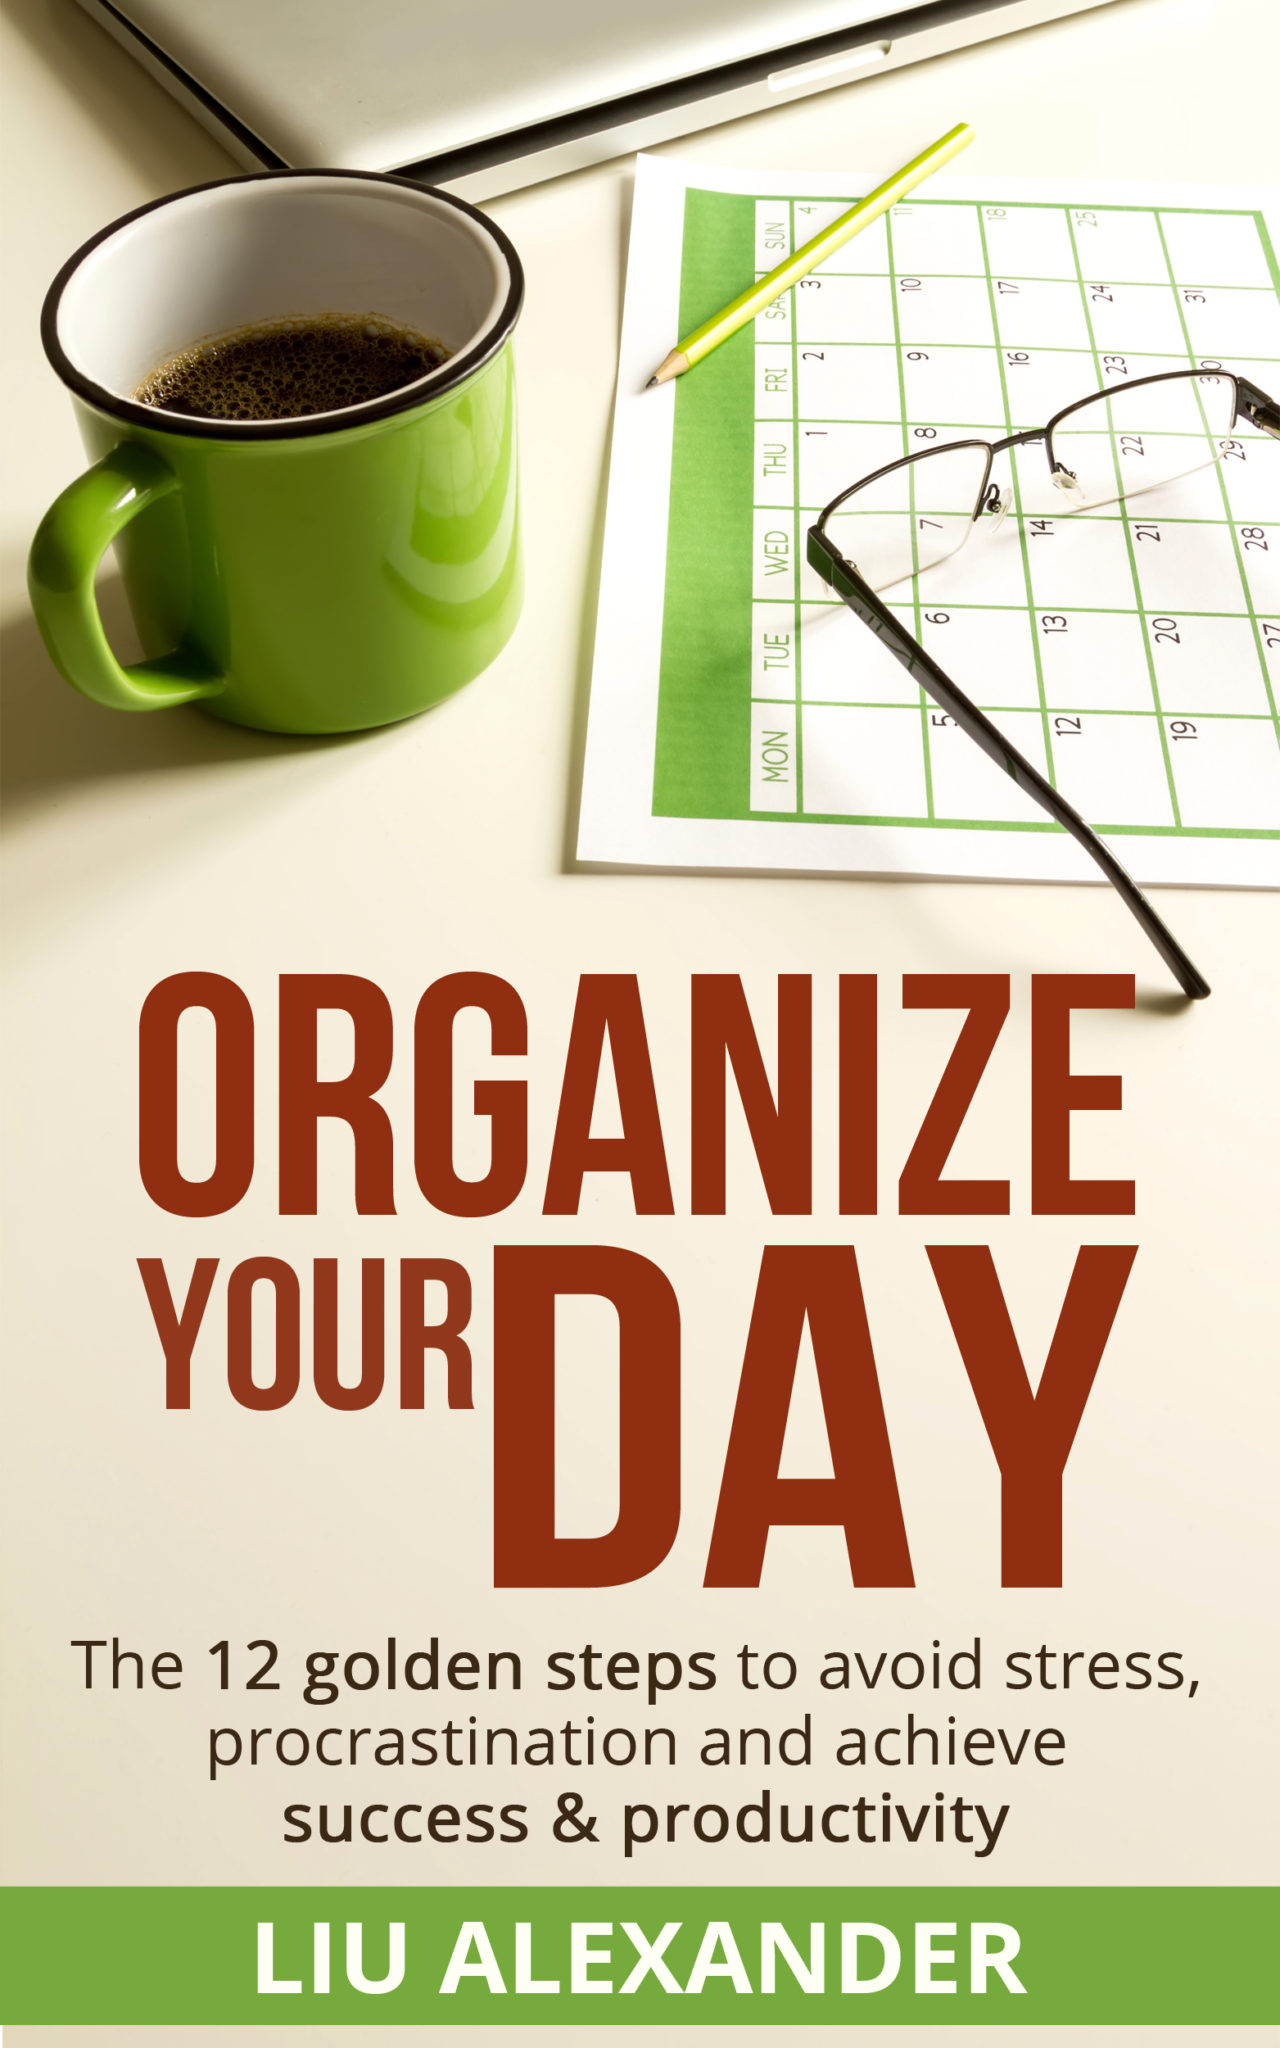 FREE: Organize Your Day: The 12 Golden Steps To Avoid Stress, Procrastination and Achieve Success And Productivity by Liu Alexander